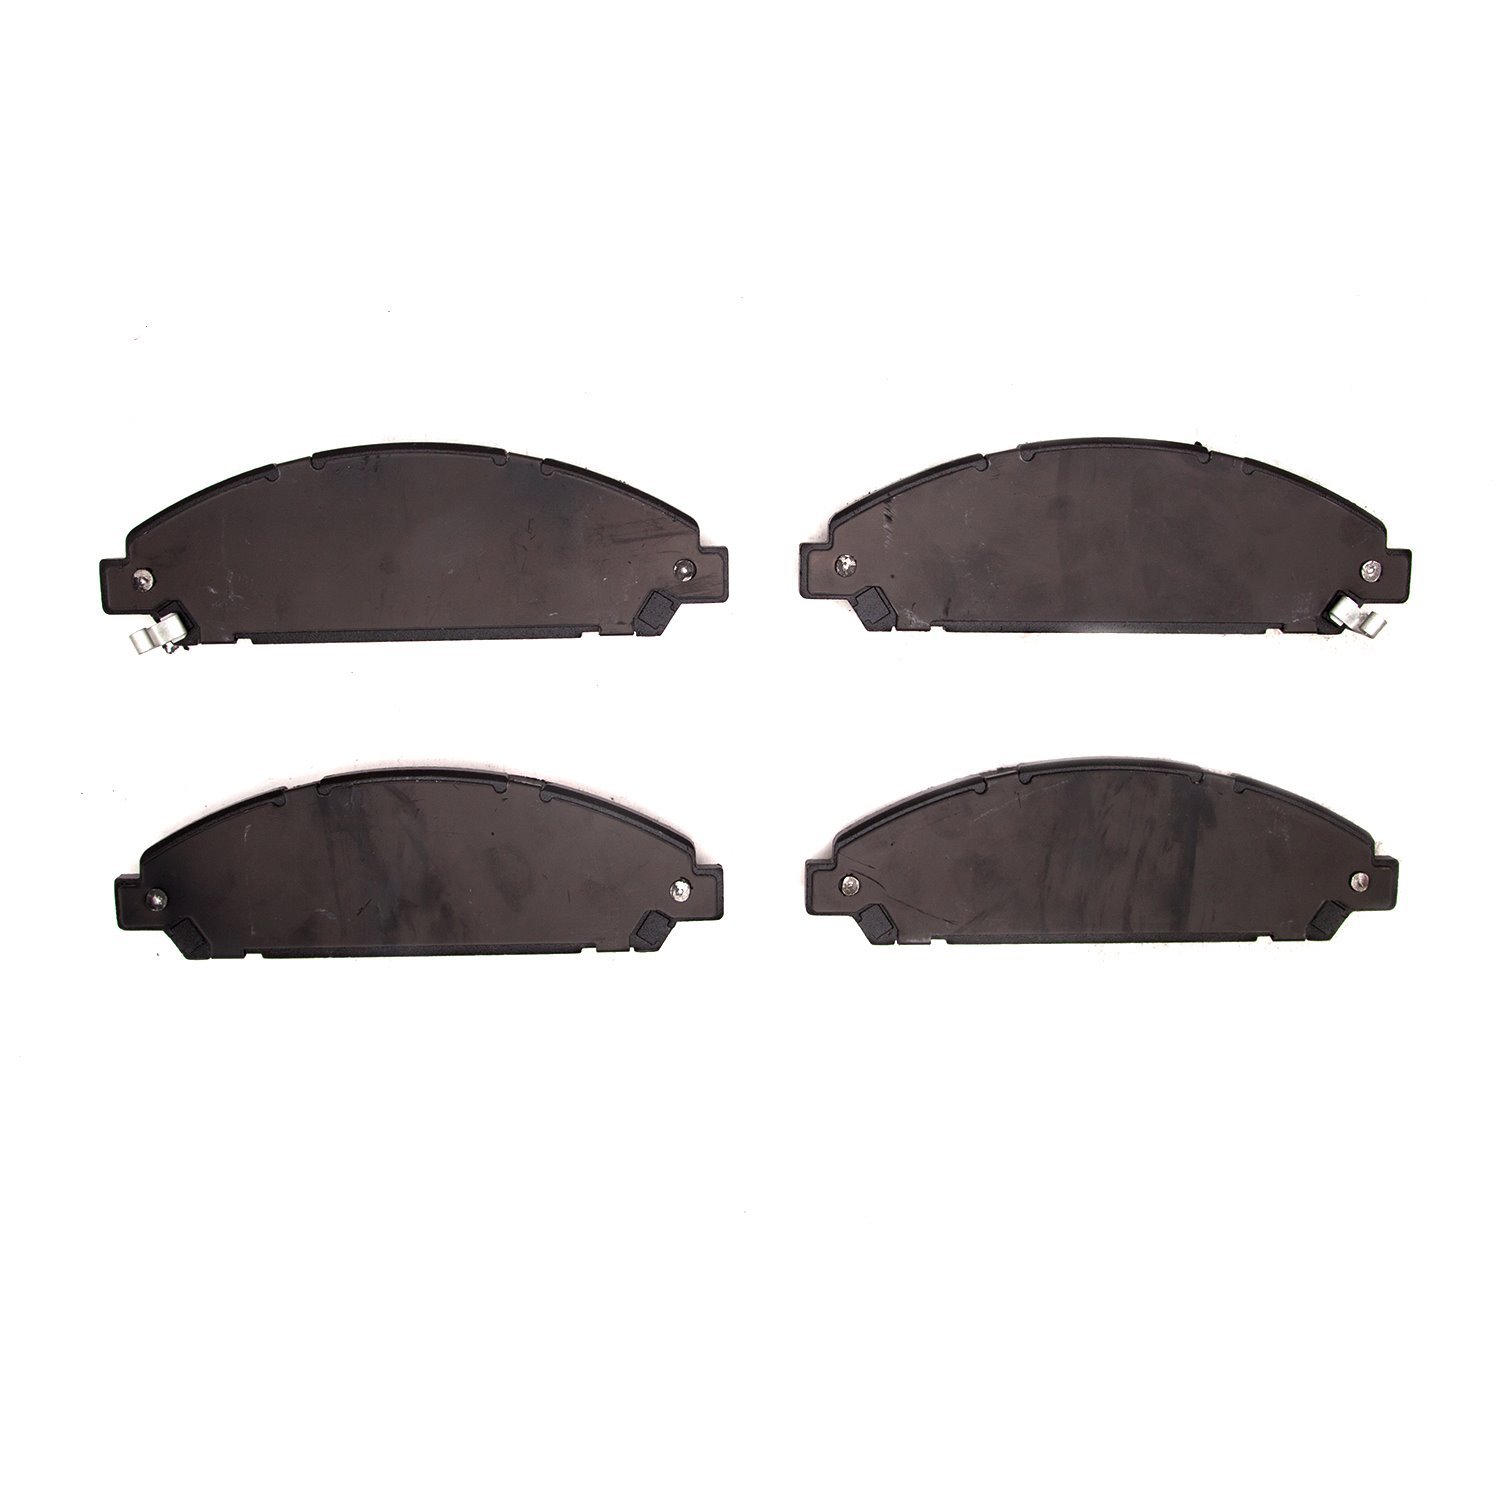 1000-1791-00 Track/Street Low-Metallic Brake Pads Kit, Fits Select Ford/Lincoln/Mercury/Mazda, Position: Front